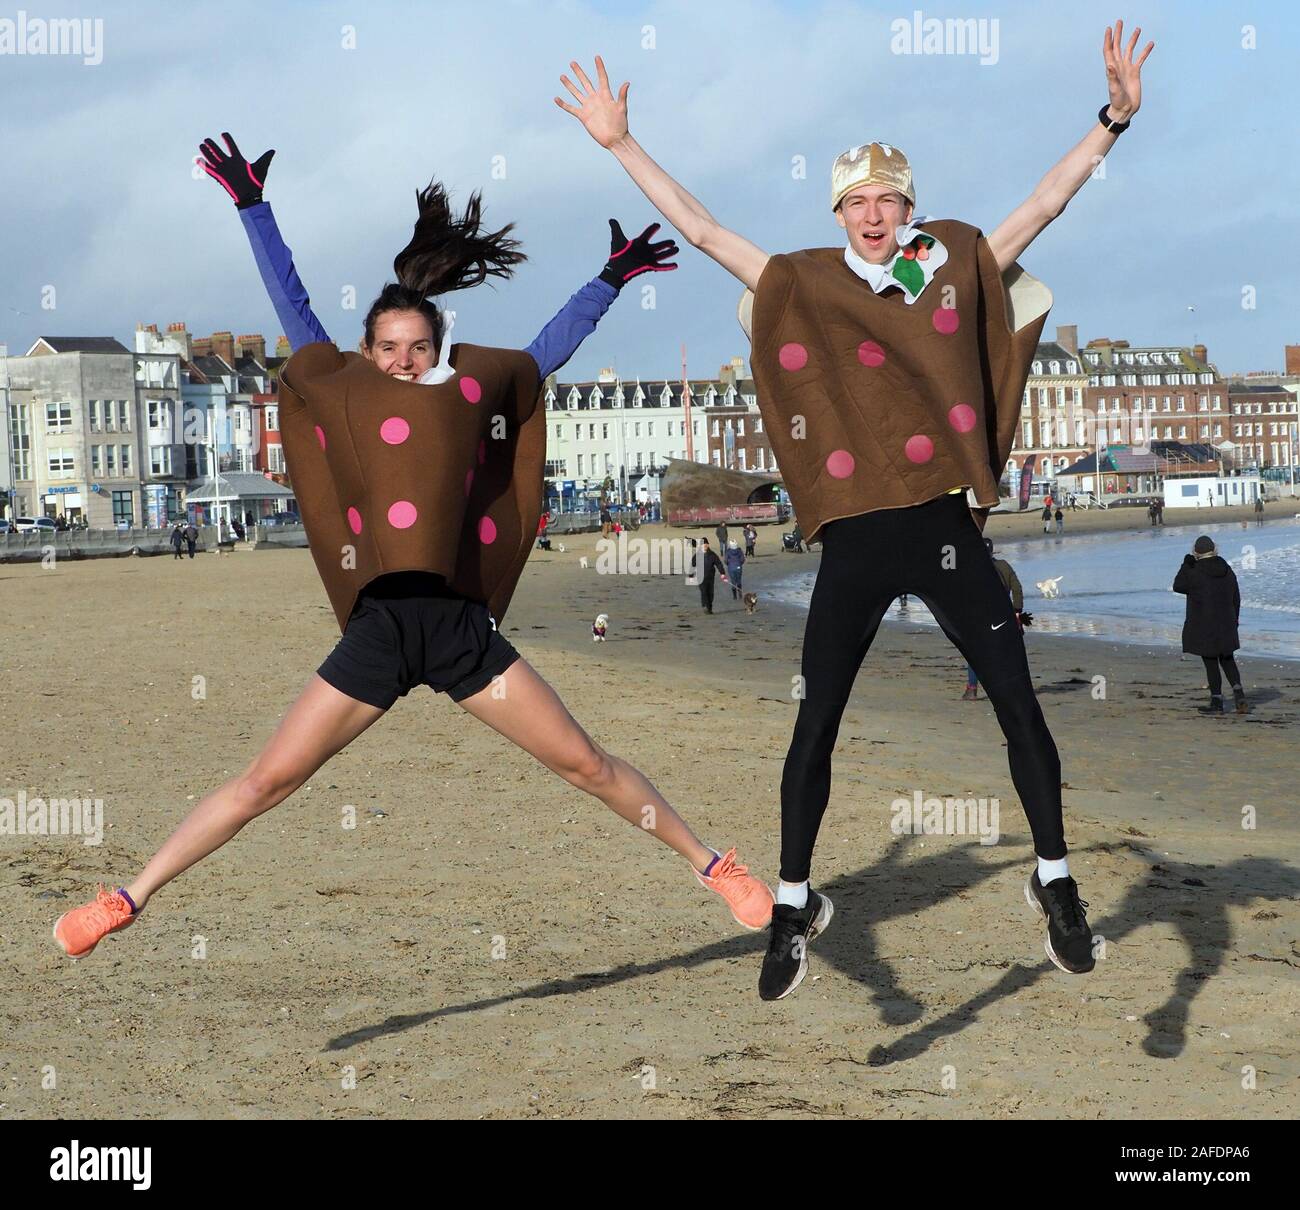 Weymouth, Dorset, UK. 15th Dec, 2019. Two Christmas puddings, Charlie Scott, left and Andrew Dumbrell, were the focus for over 200 runners dressed in santa outfits in Weymouth Dorset as they tried to catch the fleet of foot couple along a 5Km course over the town's beach. This annual event brings runners from all over the South of England to the wintery coast for a fun morning event that raises money for charity. This year a male and female pud! And if the runners do not catch the puddings they do each receive one as they cross the finishing line. Picture : Geoff Moore Stock Photo